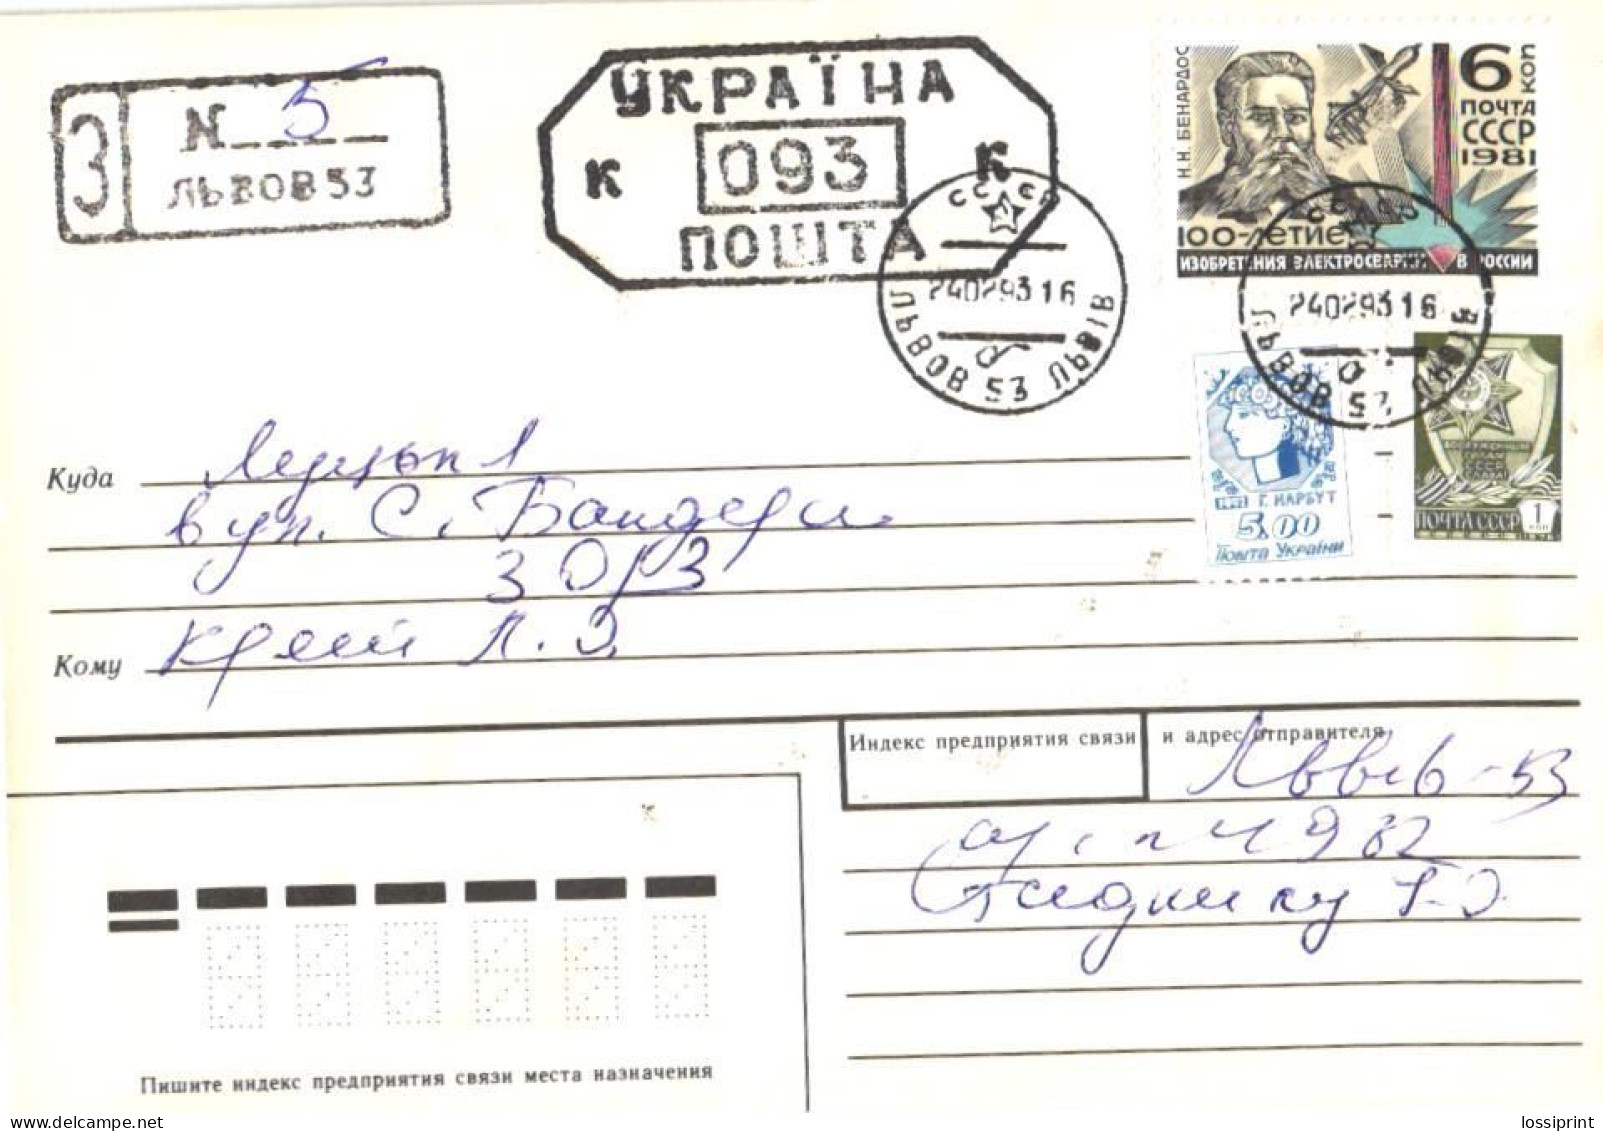 Ukraine:Ukraina:Registered Letter From Lvov53 With Soviet Union And Ukraine Stamps And Cancellation, 1993 - Ucraina